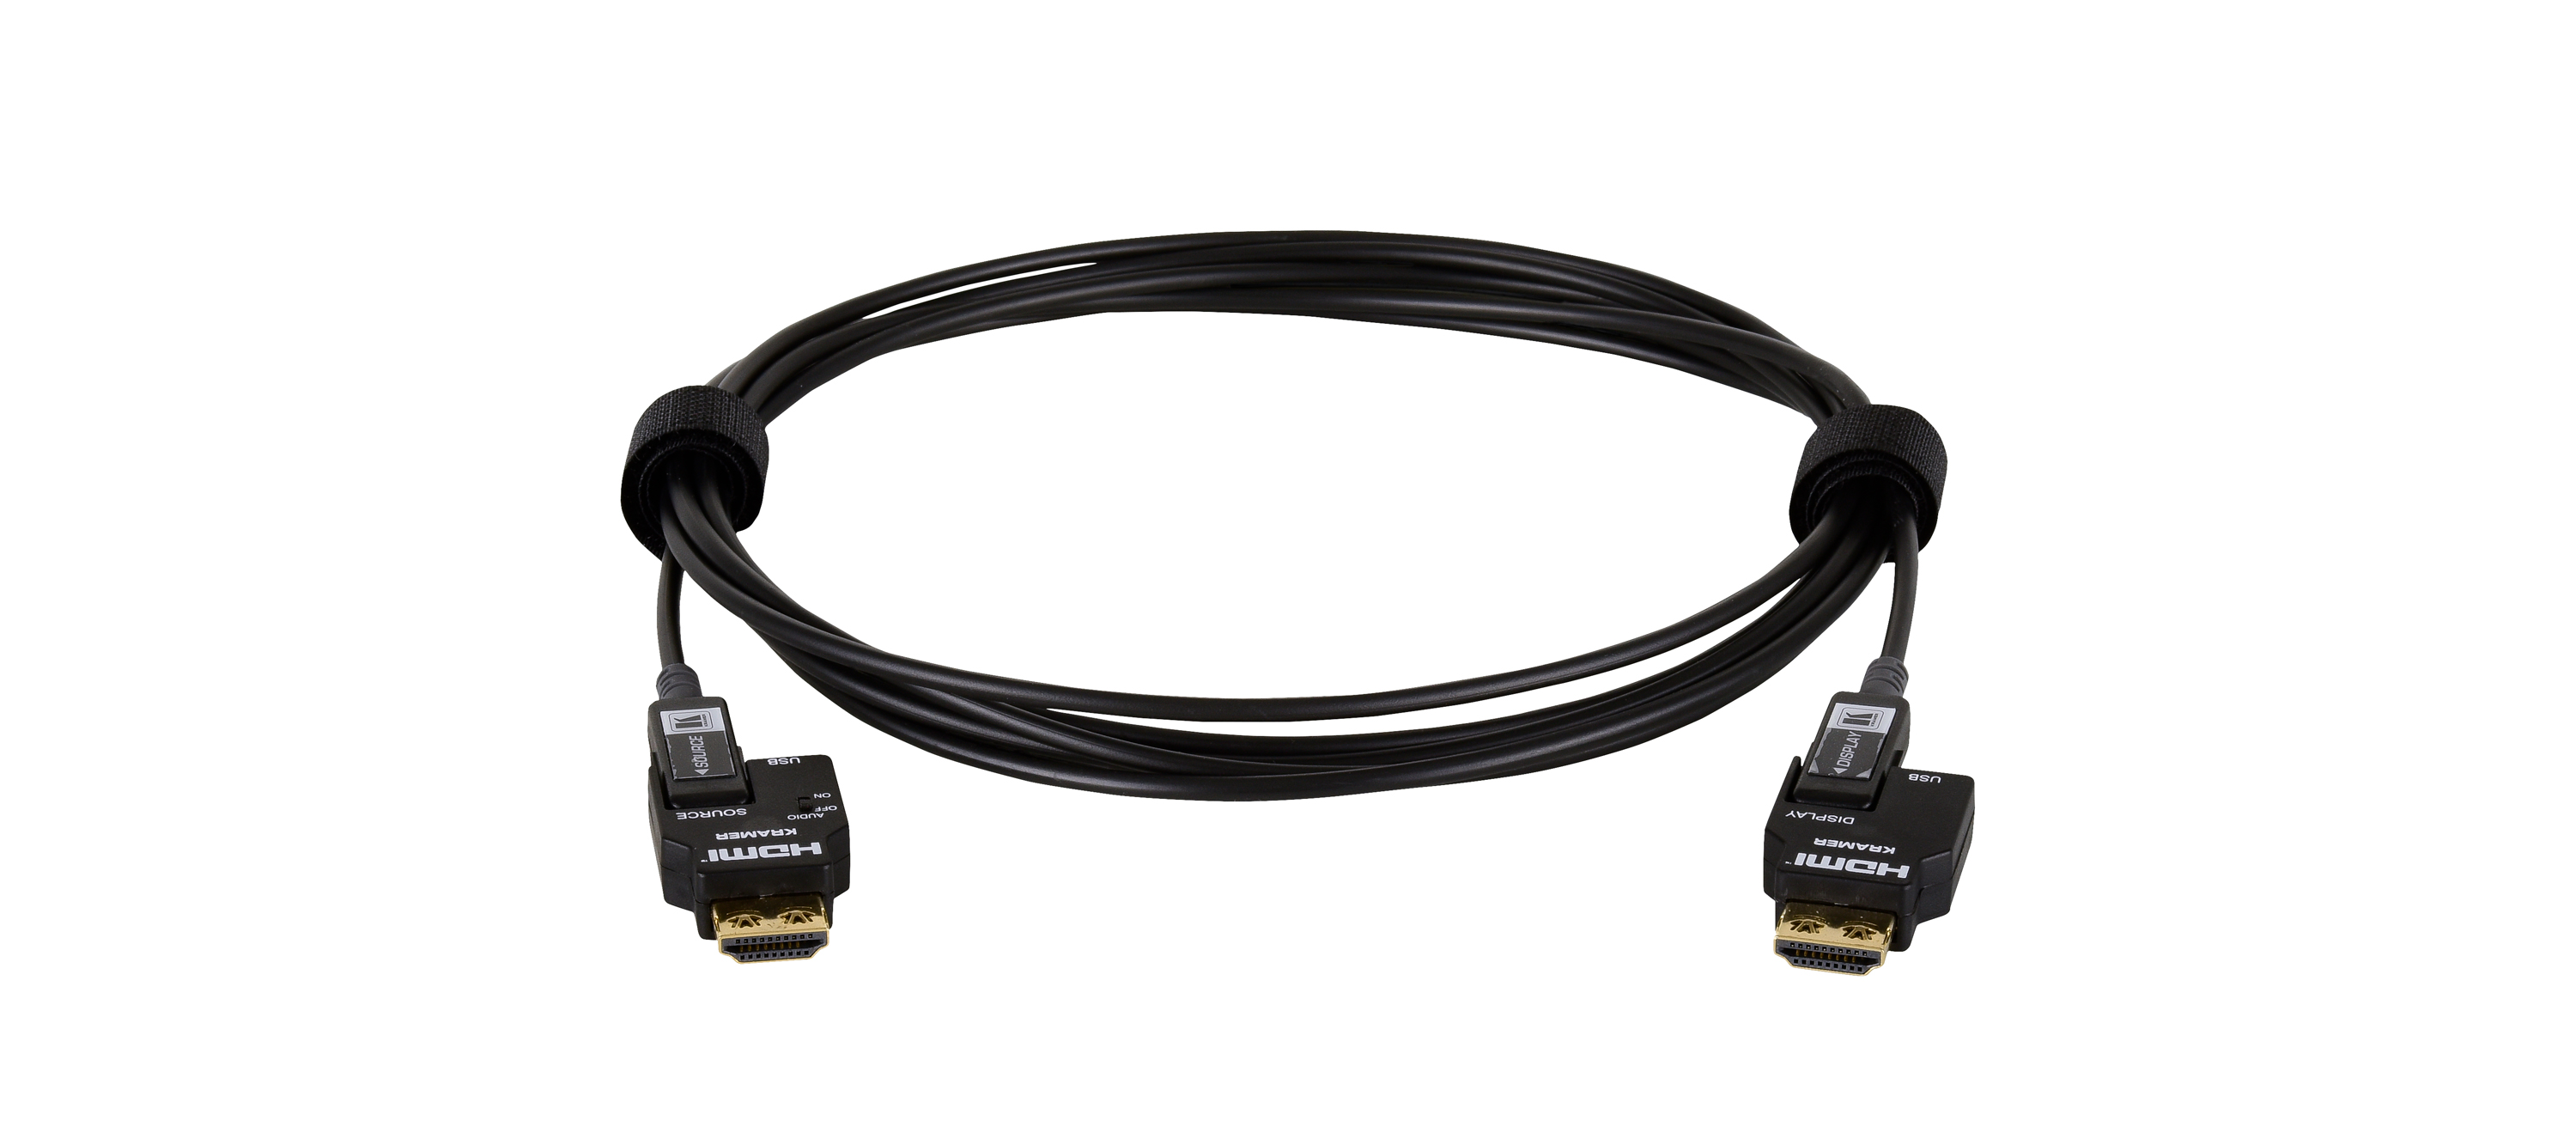 CRS-FIBERH-S1-164 Secured Unidirectional HDMI over Pure Fiber Cable - 164'